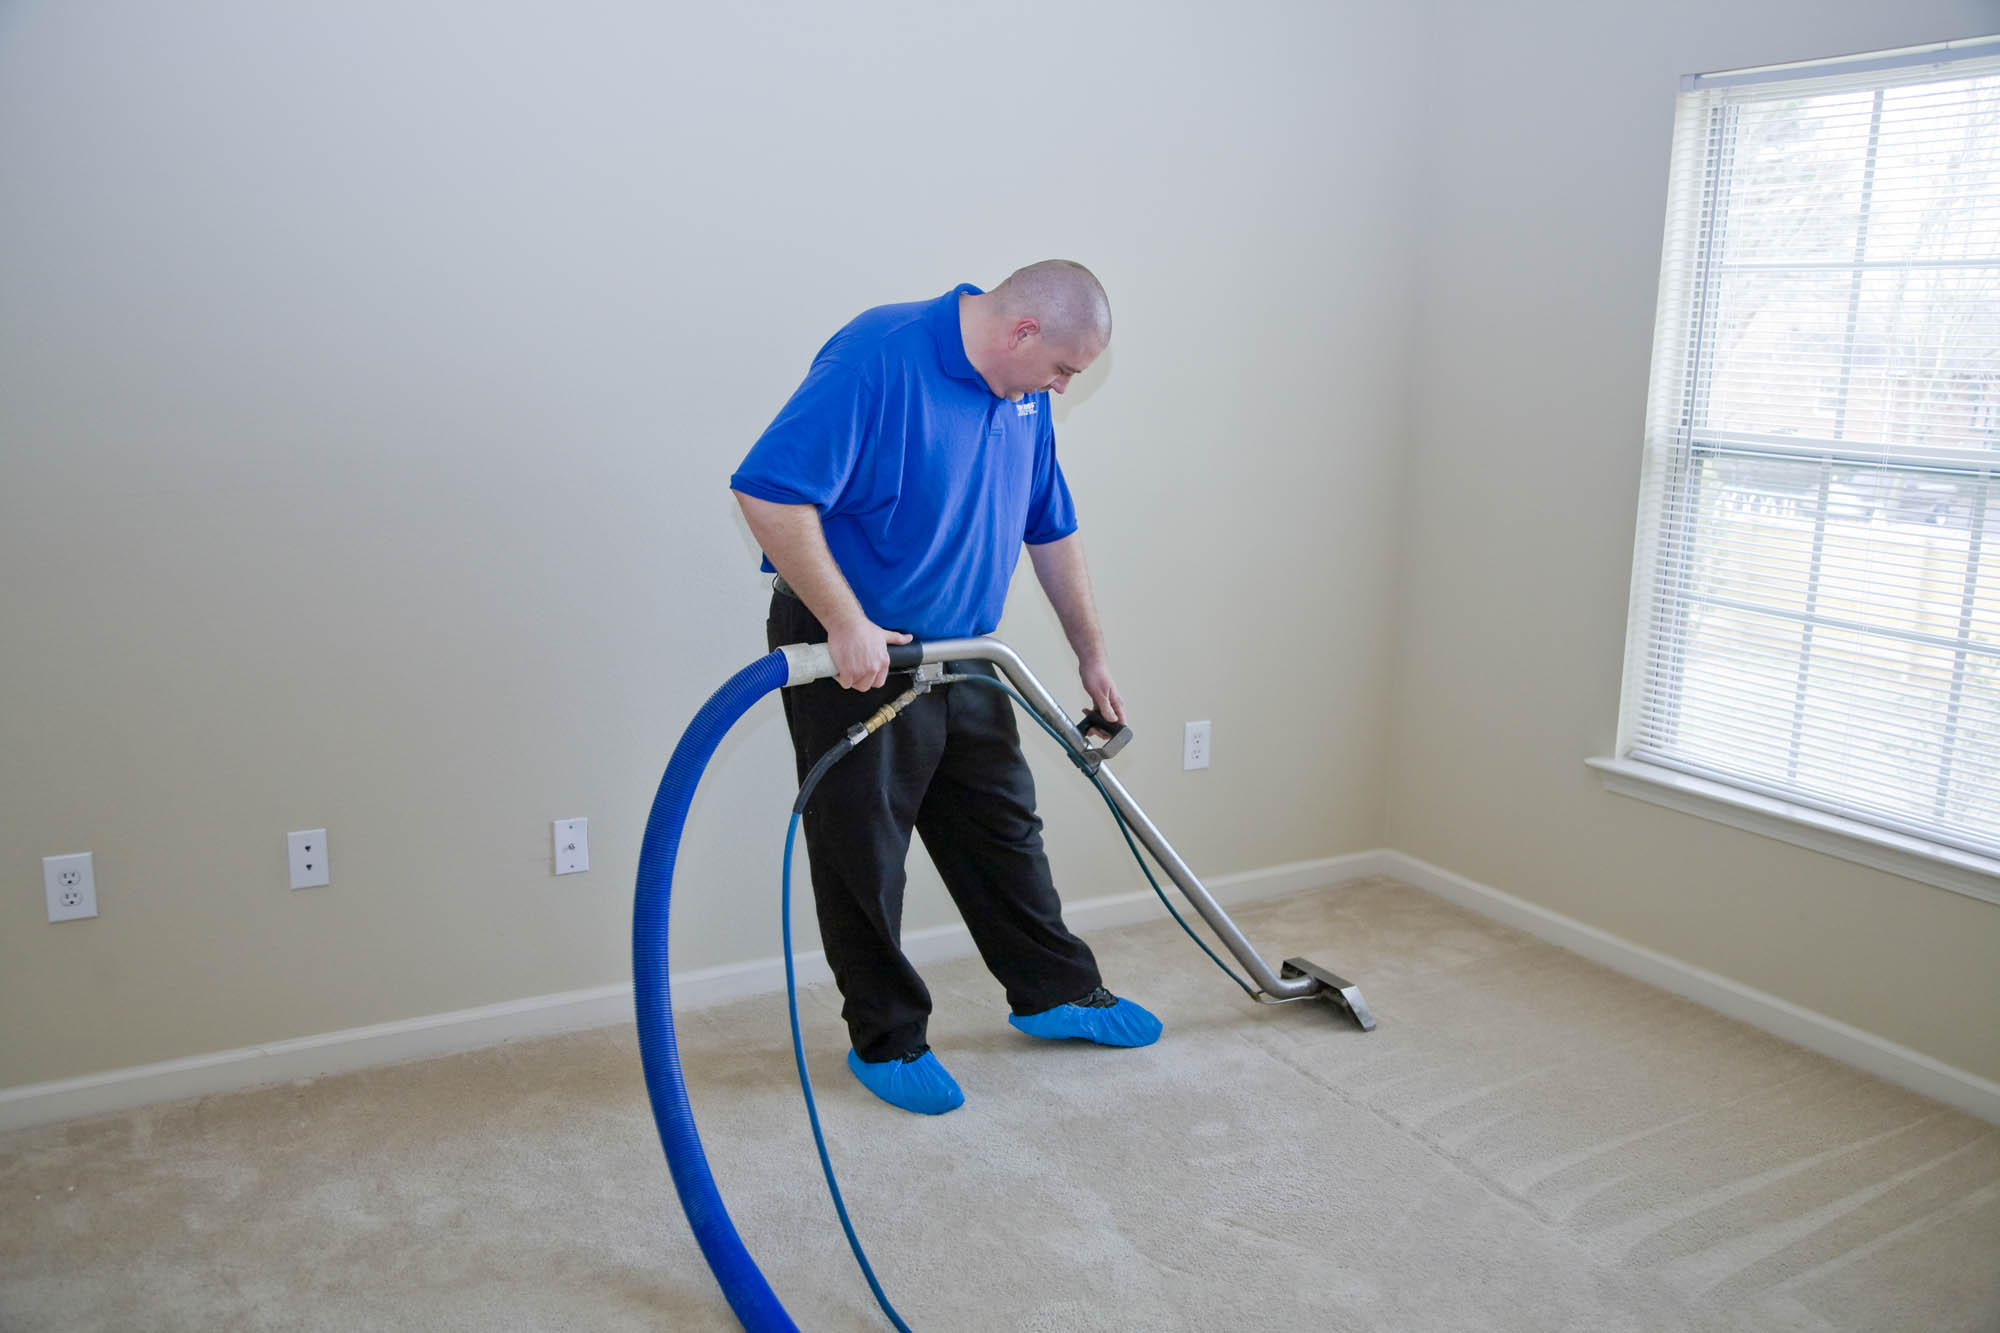 How Do I Find a Reputable Carpet Cleaning Company